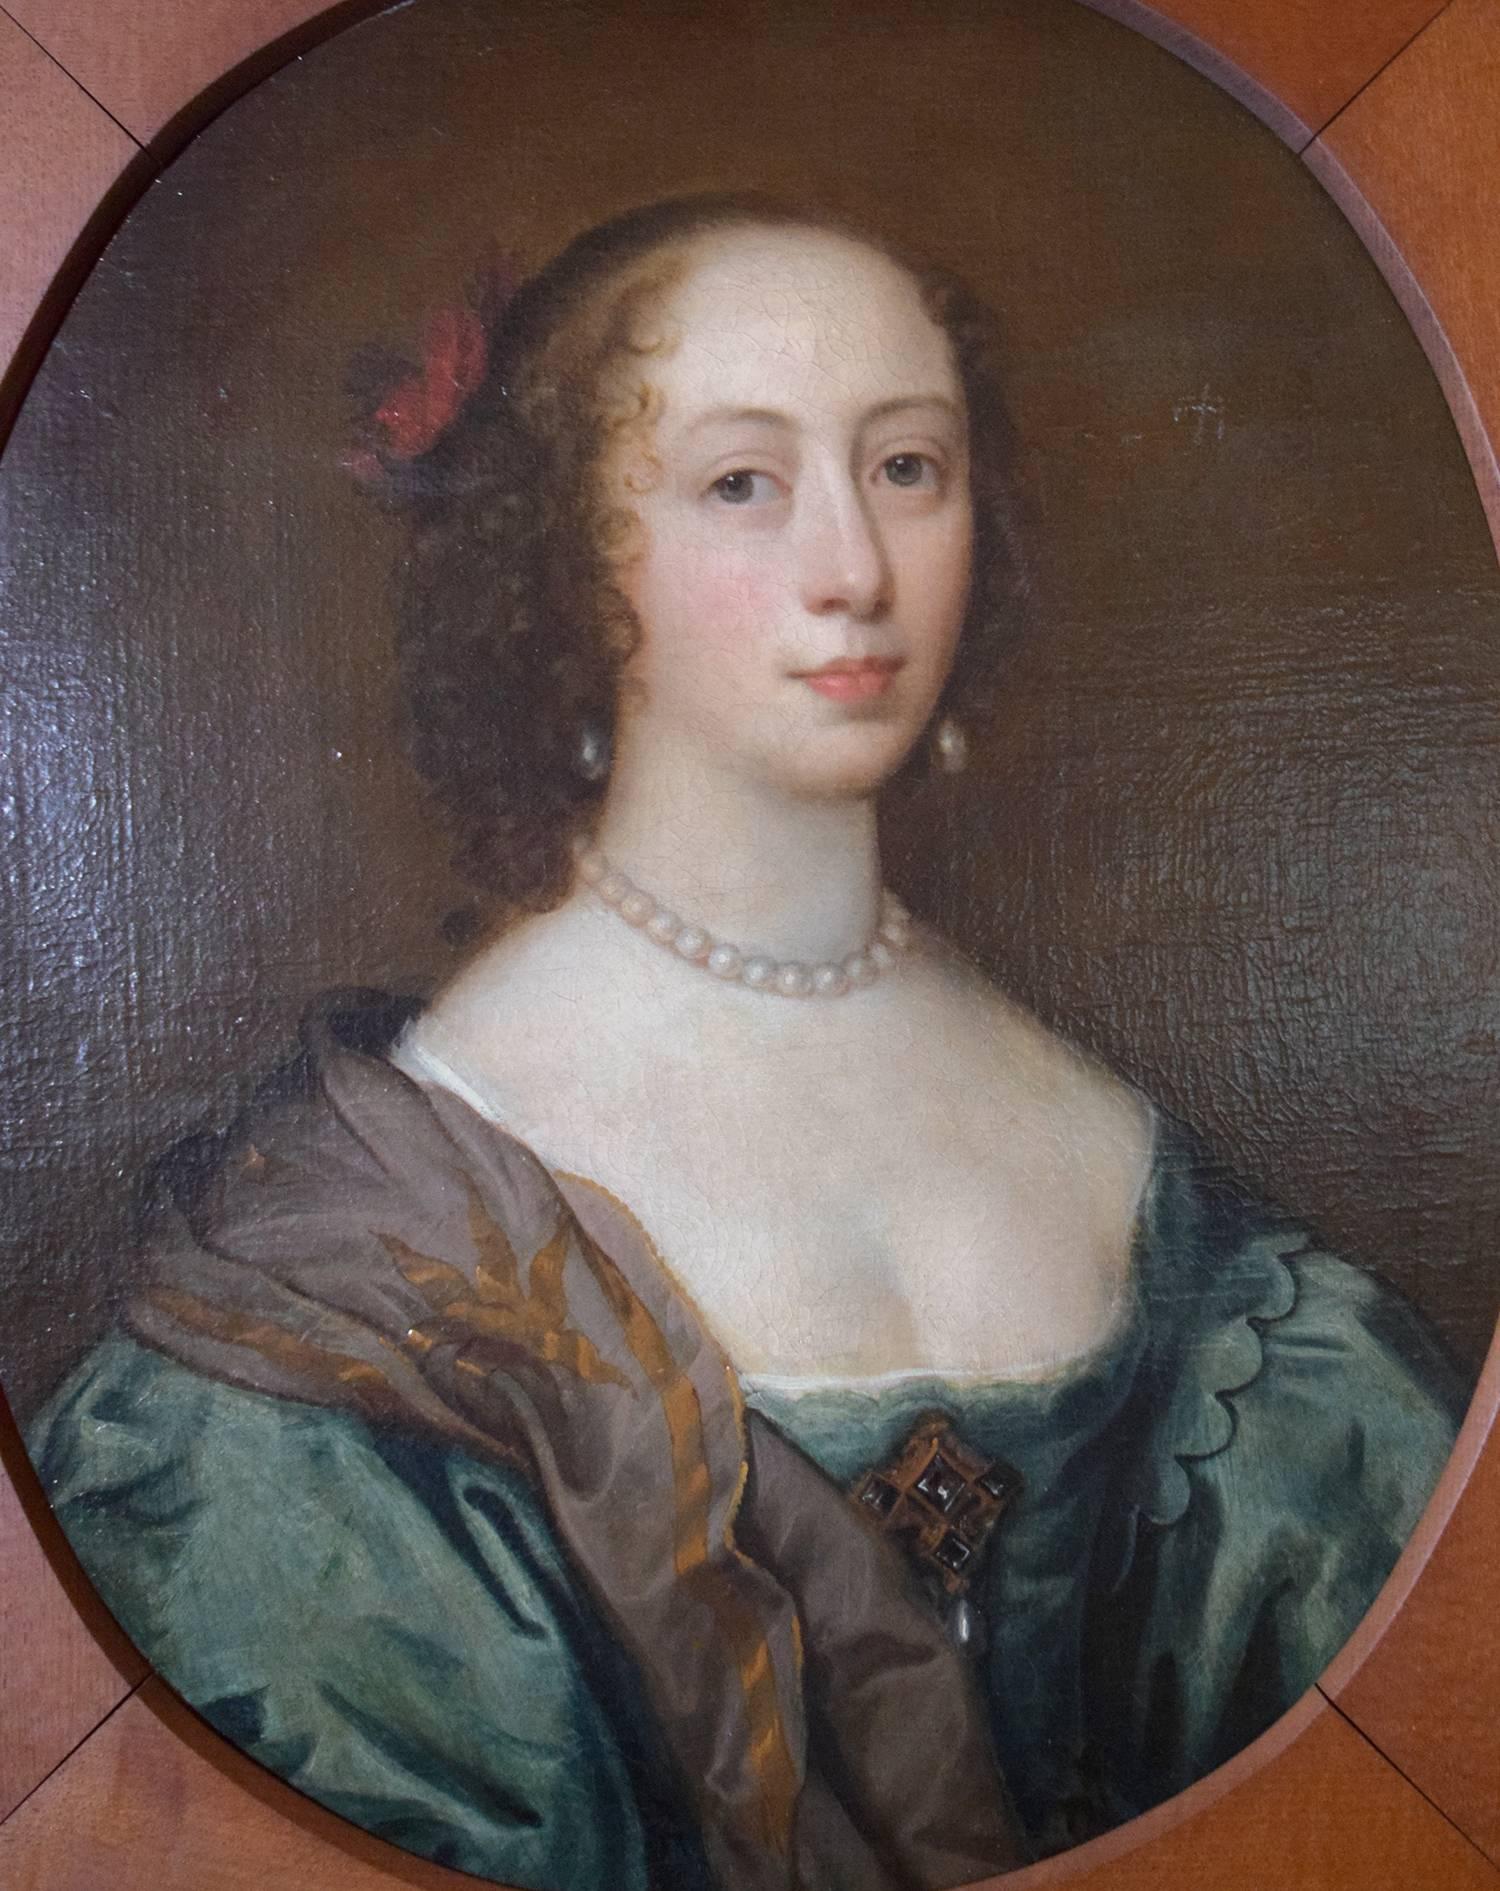 17thc. British School Portrait of a Young Woman - Brown Portrait Painting by Unknown